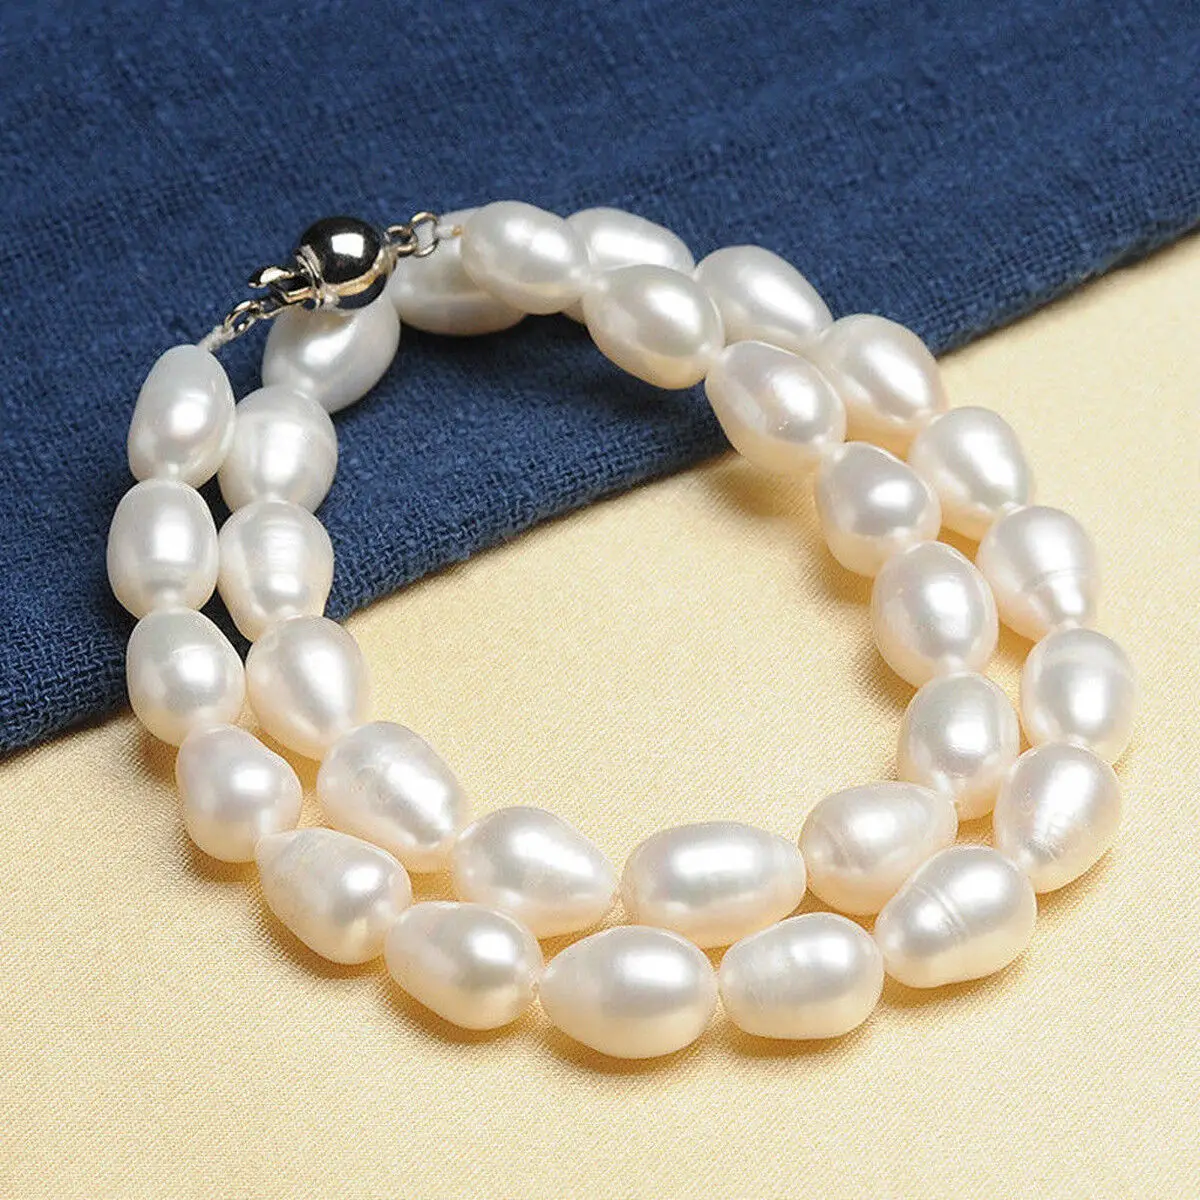 Real Natural White 10-12mm Rice Akoya  Pearls Necklace Jewelry 18''